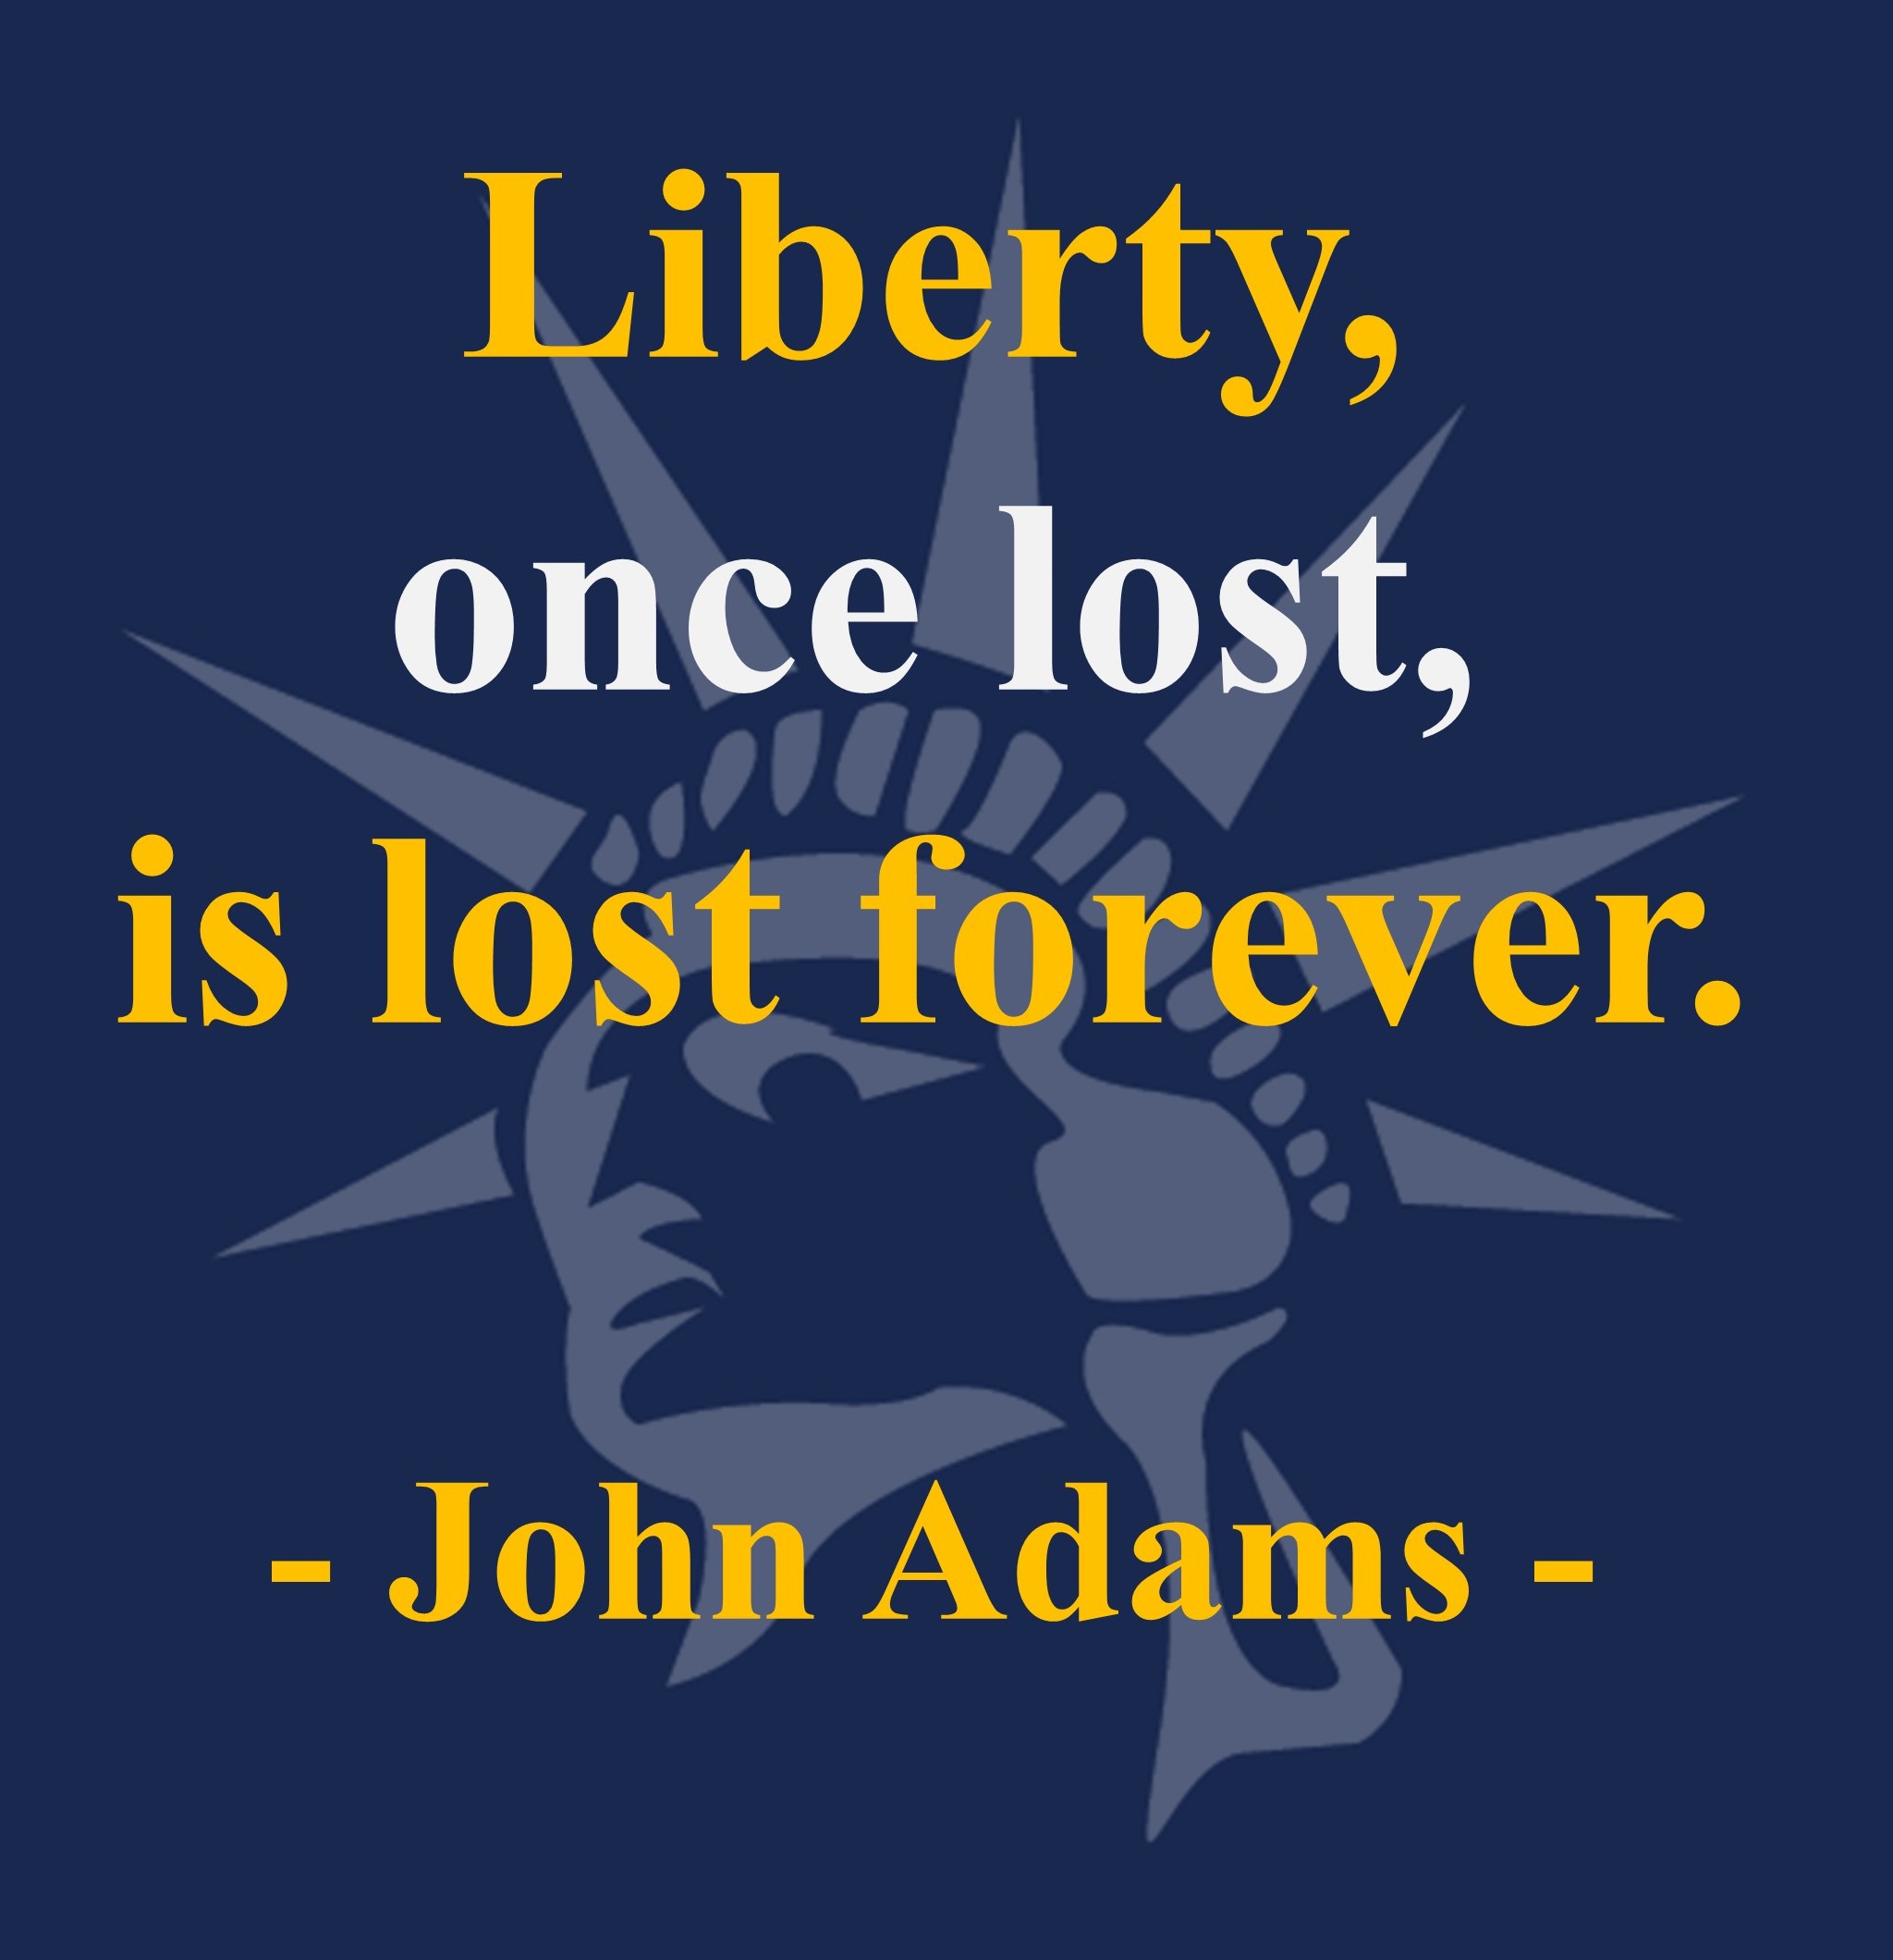 Liberty, once lost, is lost forever.